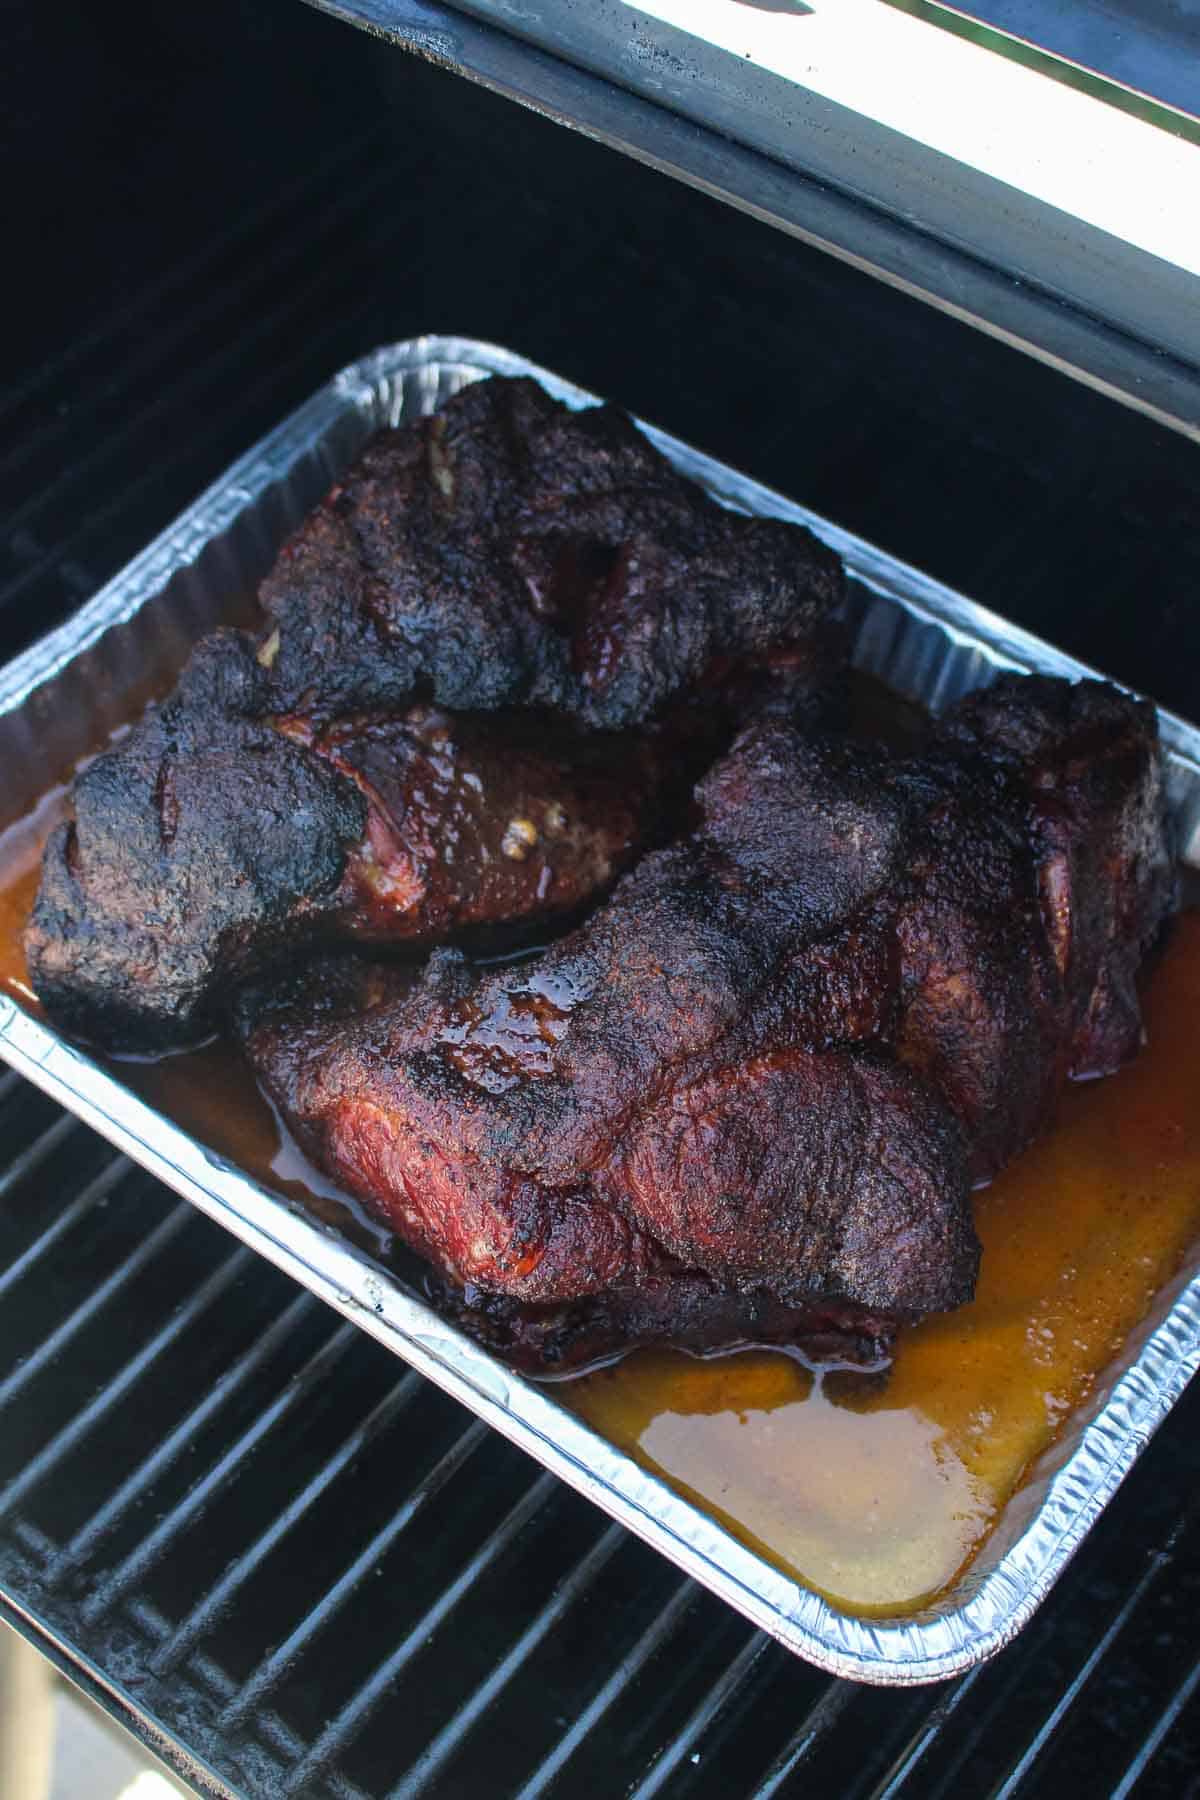 The pork butt being placed back on the grill, sitting in a tray with beef broth and light beer.